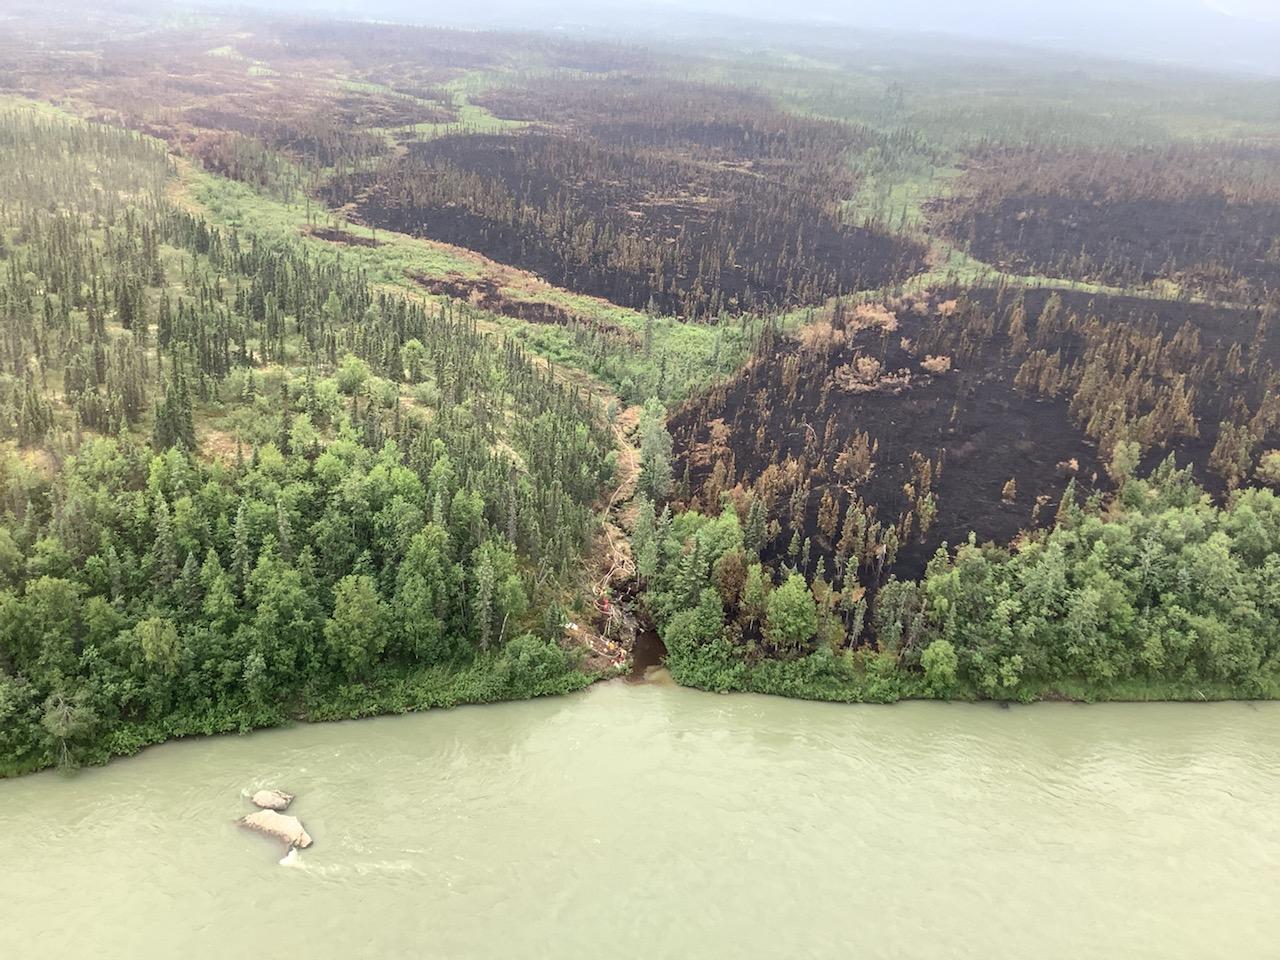 This aerial photo shows the pattern of burned areas from defensive firing operations near Lime Village. (courtesy of Karen Scholl, Alaska Incident Management Team)